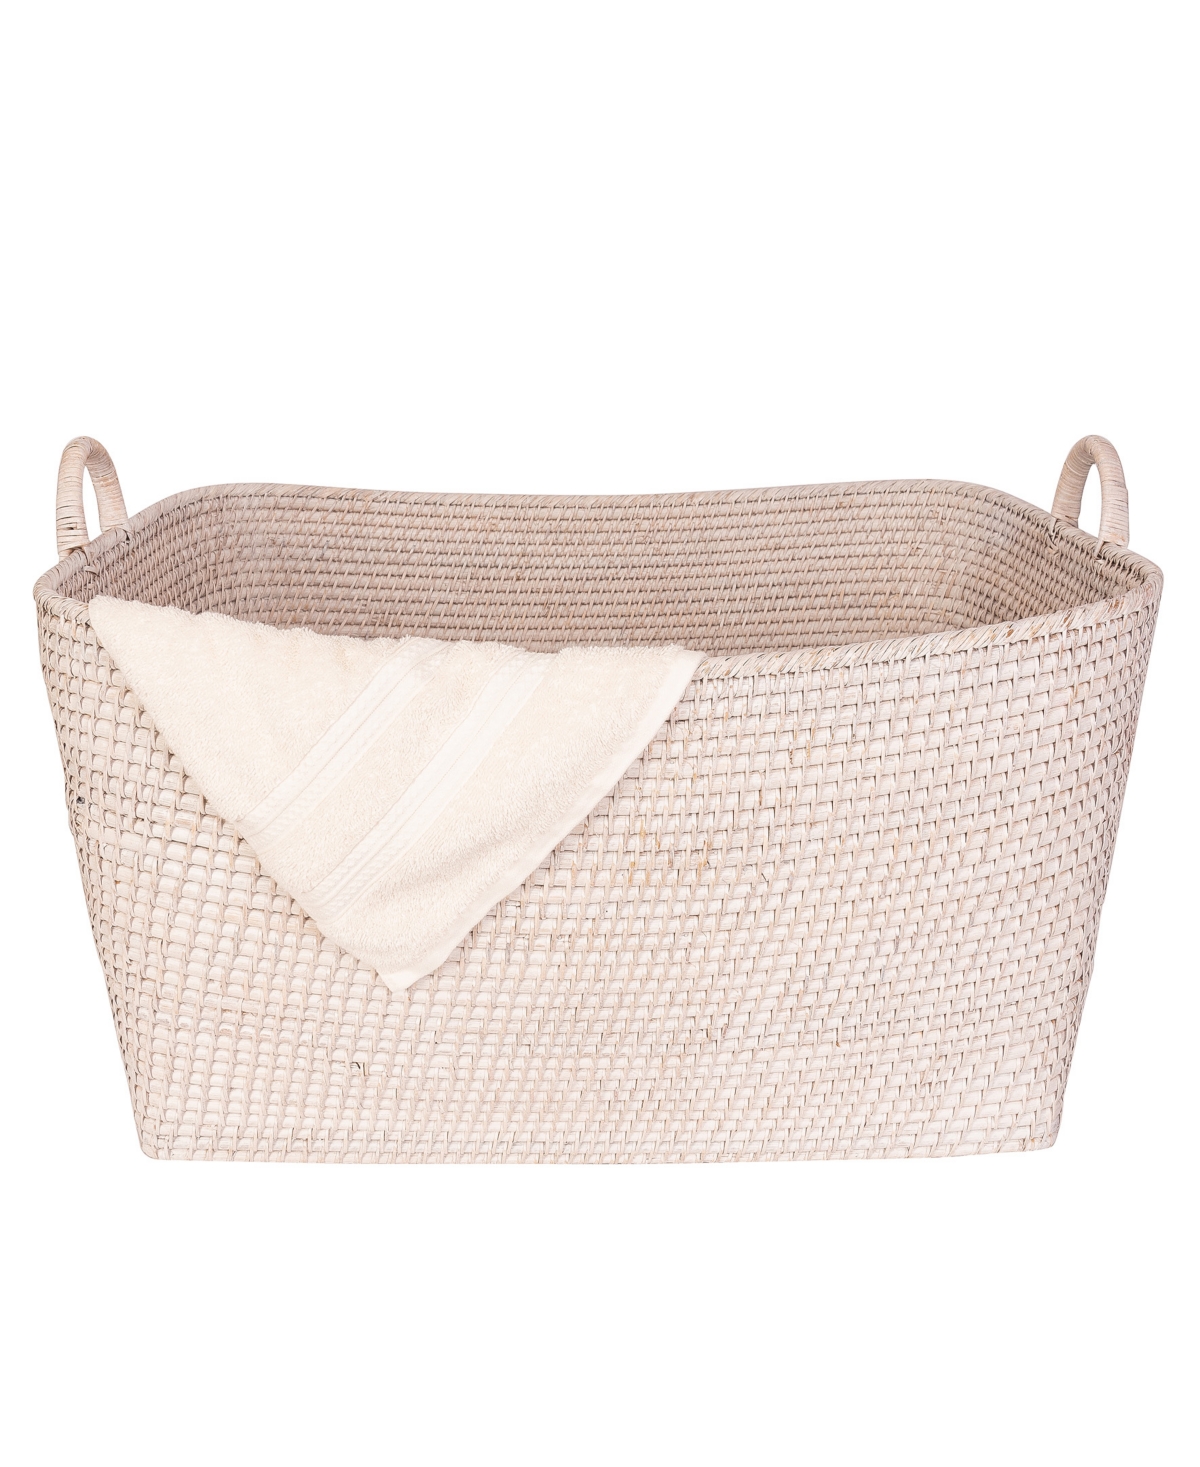 Shop Artifacts Trading Company Saboga Home Everything Basket With Hoop Handles In White Wash